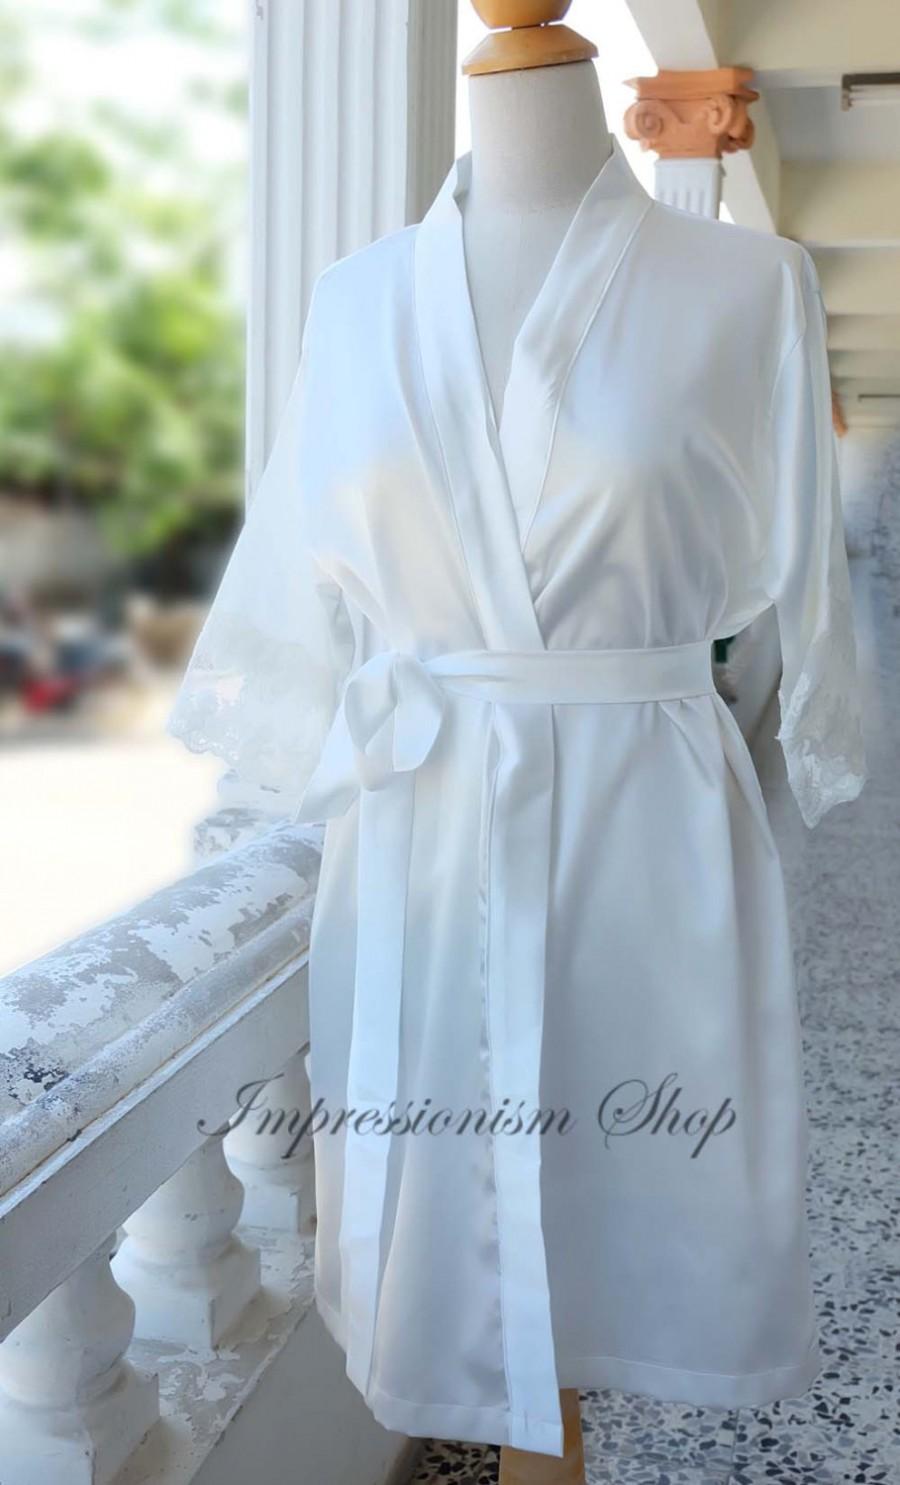 Mariage - White Ivory Satin Lace Robe for Bride, Lingerie, Getting Ready, Bridal Gift, Bachelorette party Gift, Honeymoon, Lace Kimono, Wedding Gift